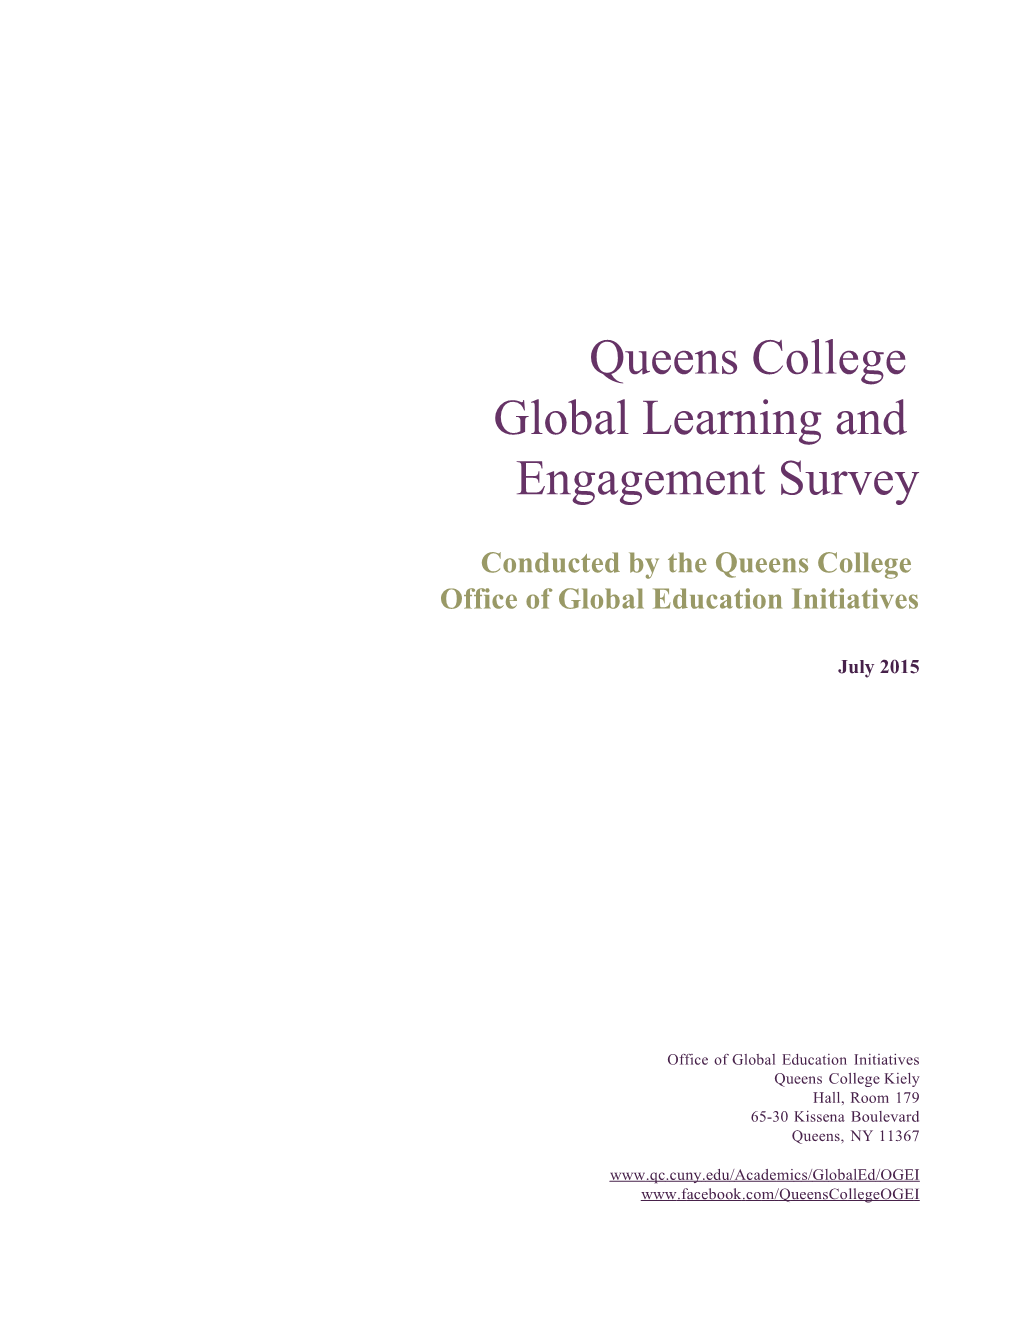 Conducted by the Queens College